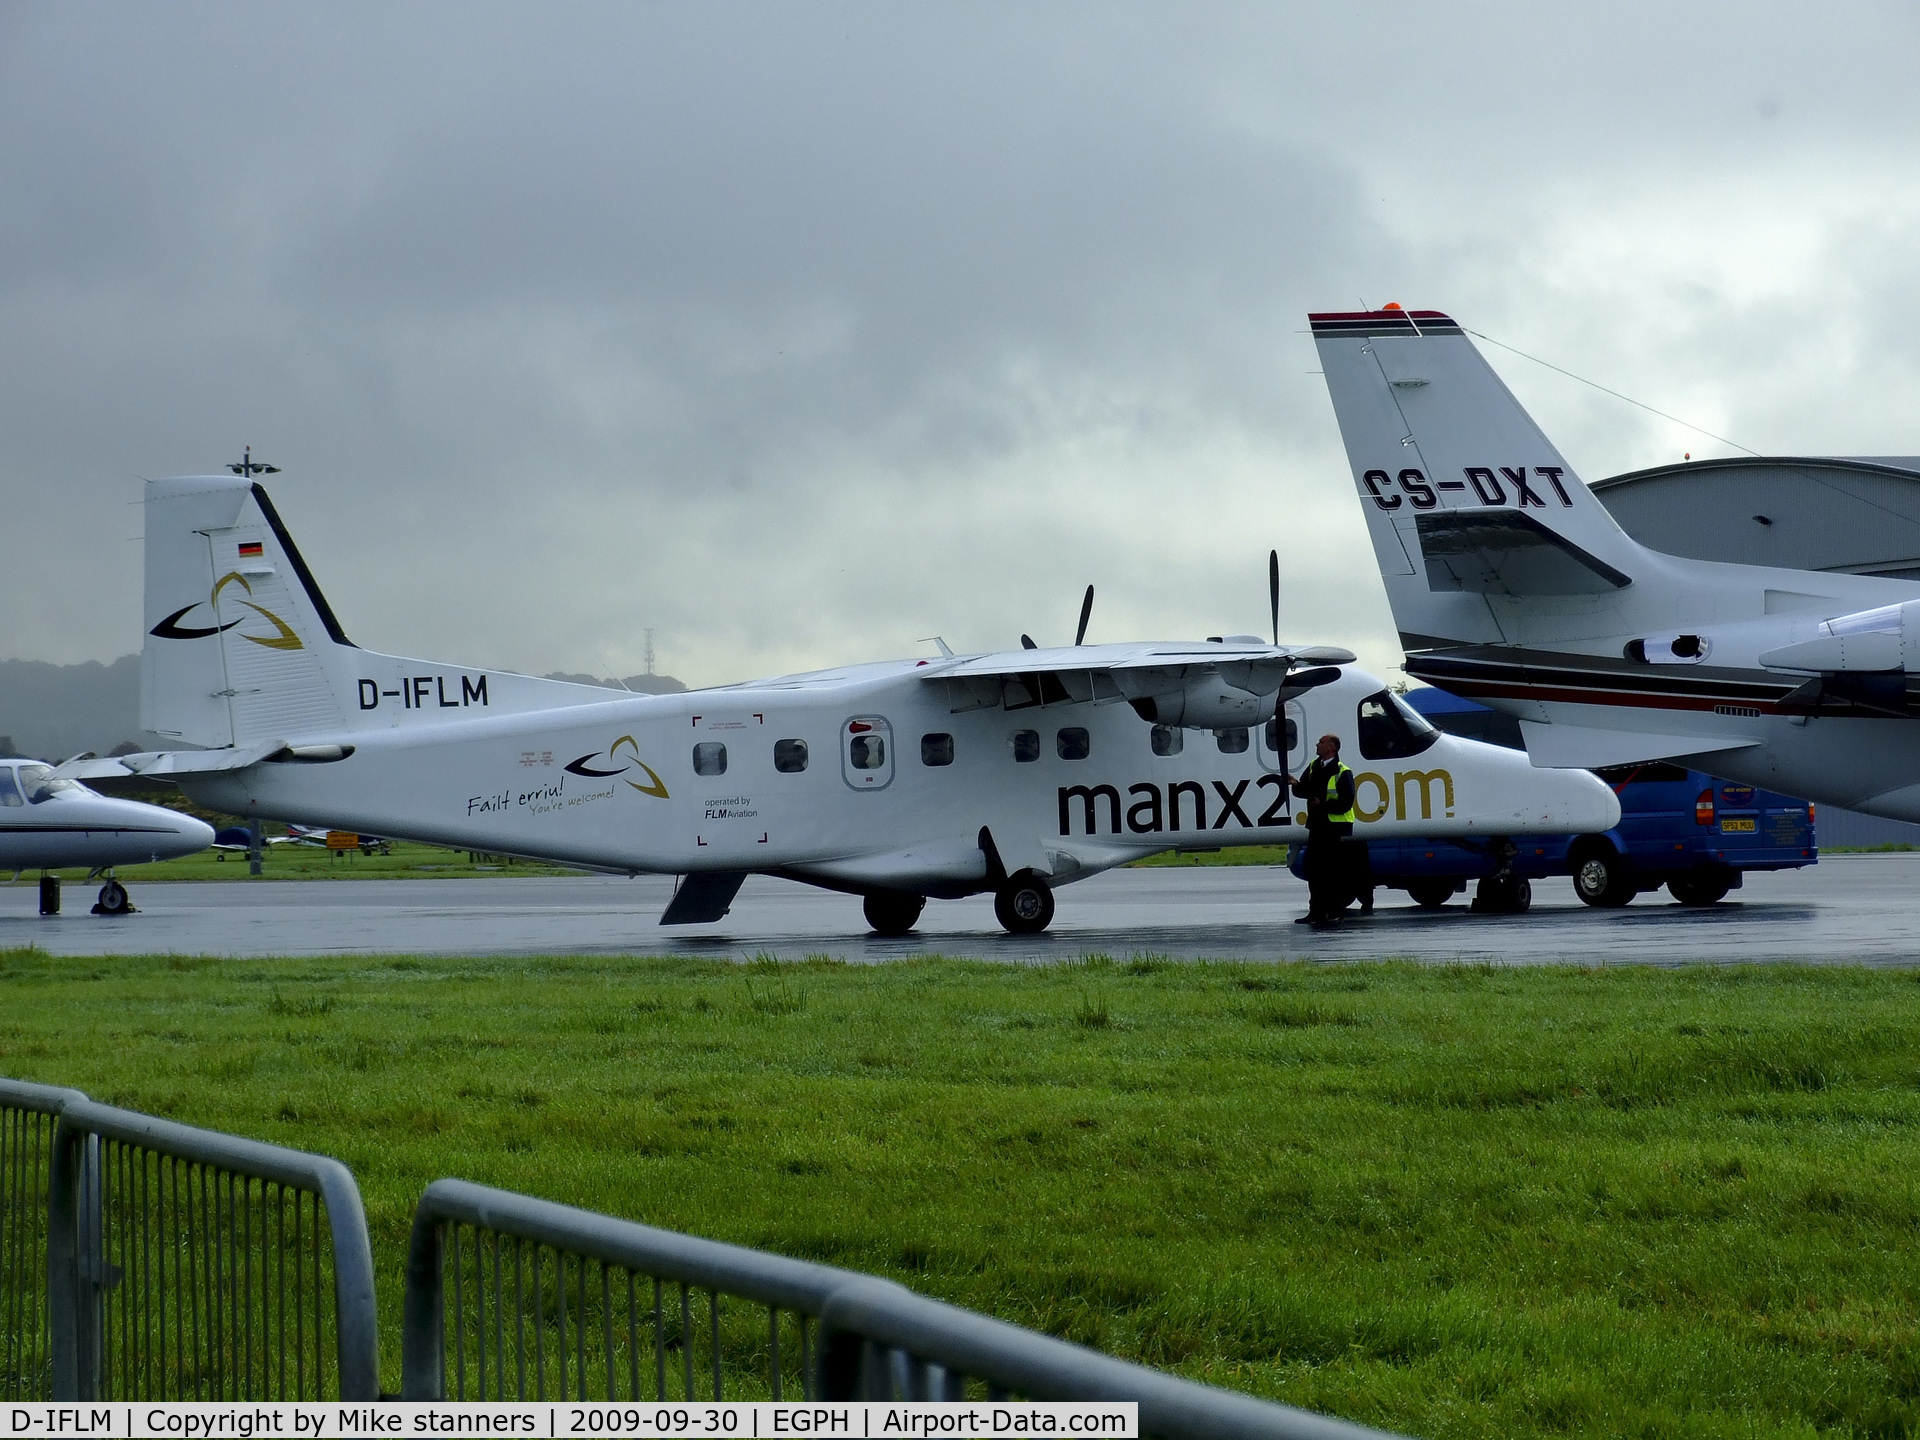 D-IFLM, 1984 Dornier 228-202K C/N 8046, Do.228 from FLM Aviation still in the colours of Manx2 airlines